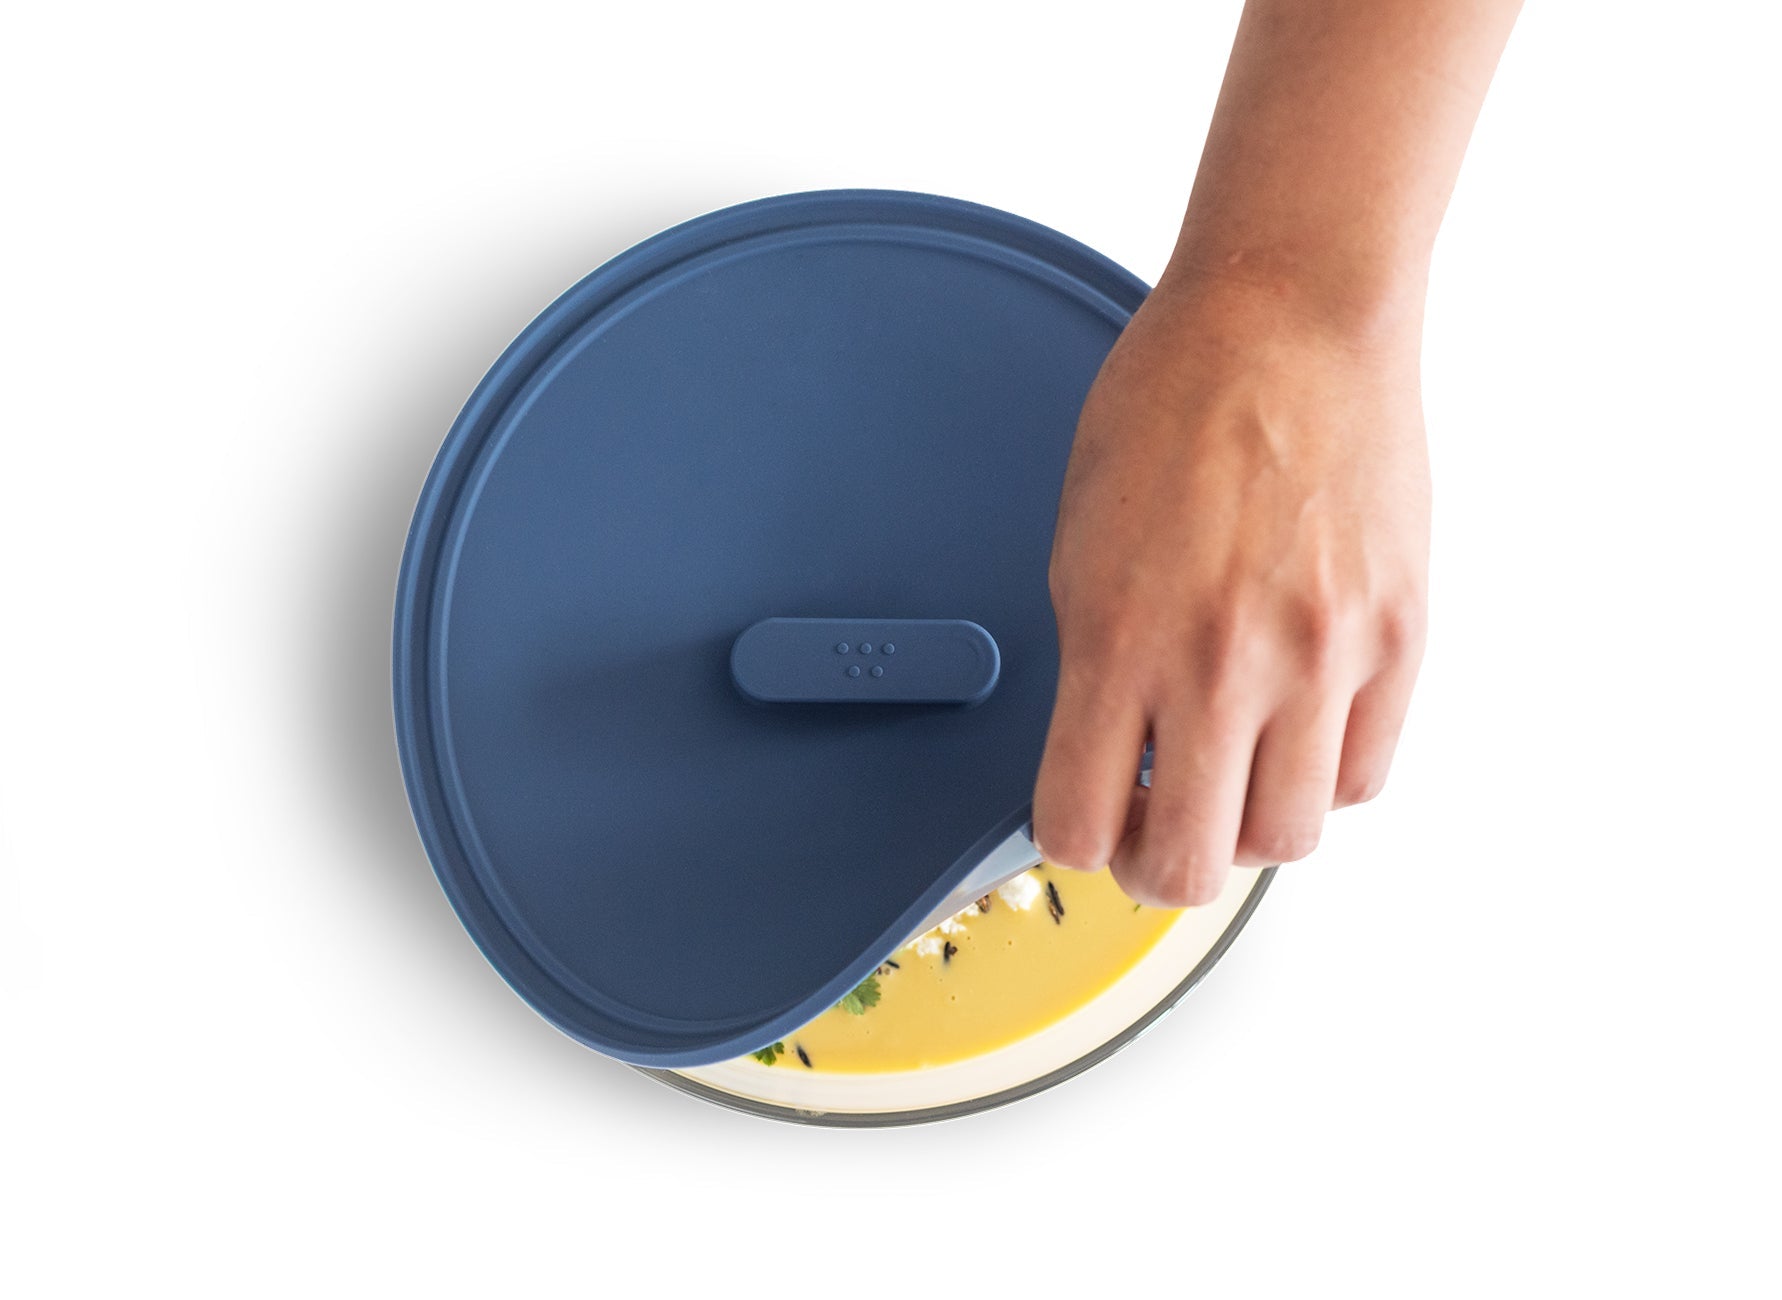 {{8-inch, 10-inch, 12-inch, 8-10-12-inch}} Peeling a Misen Universal Lid off of a bowl of creamy yellow squash soup.